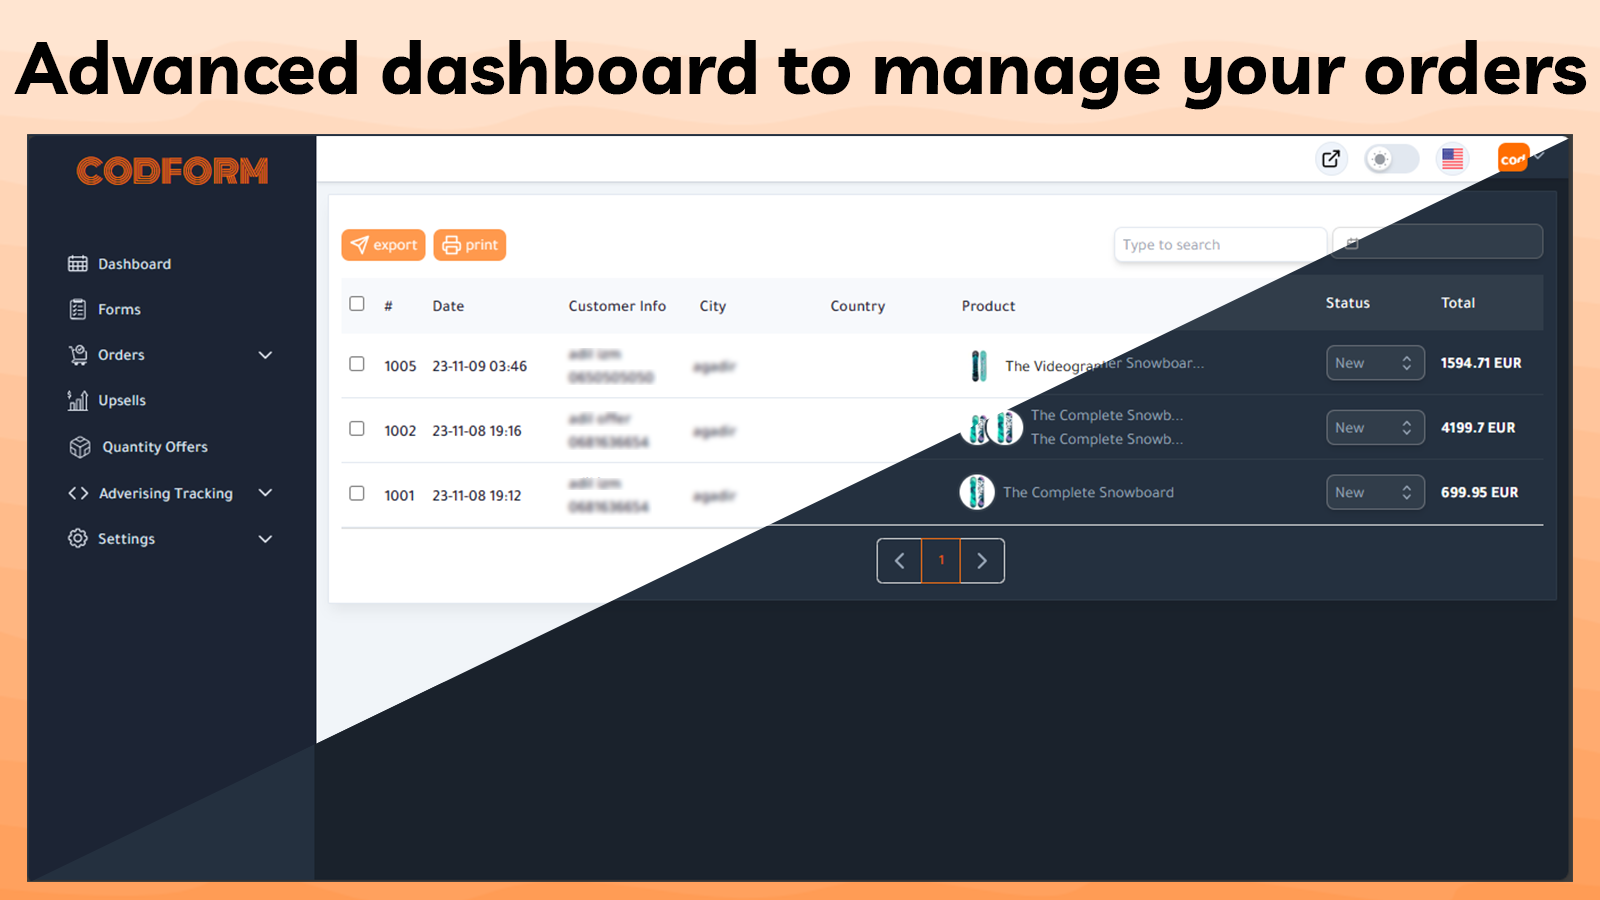 Advanced dashboard to manage your orders